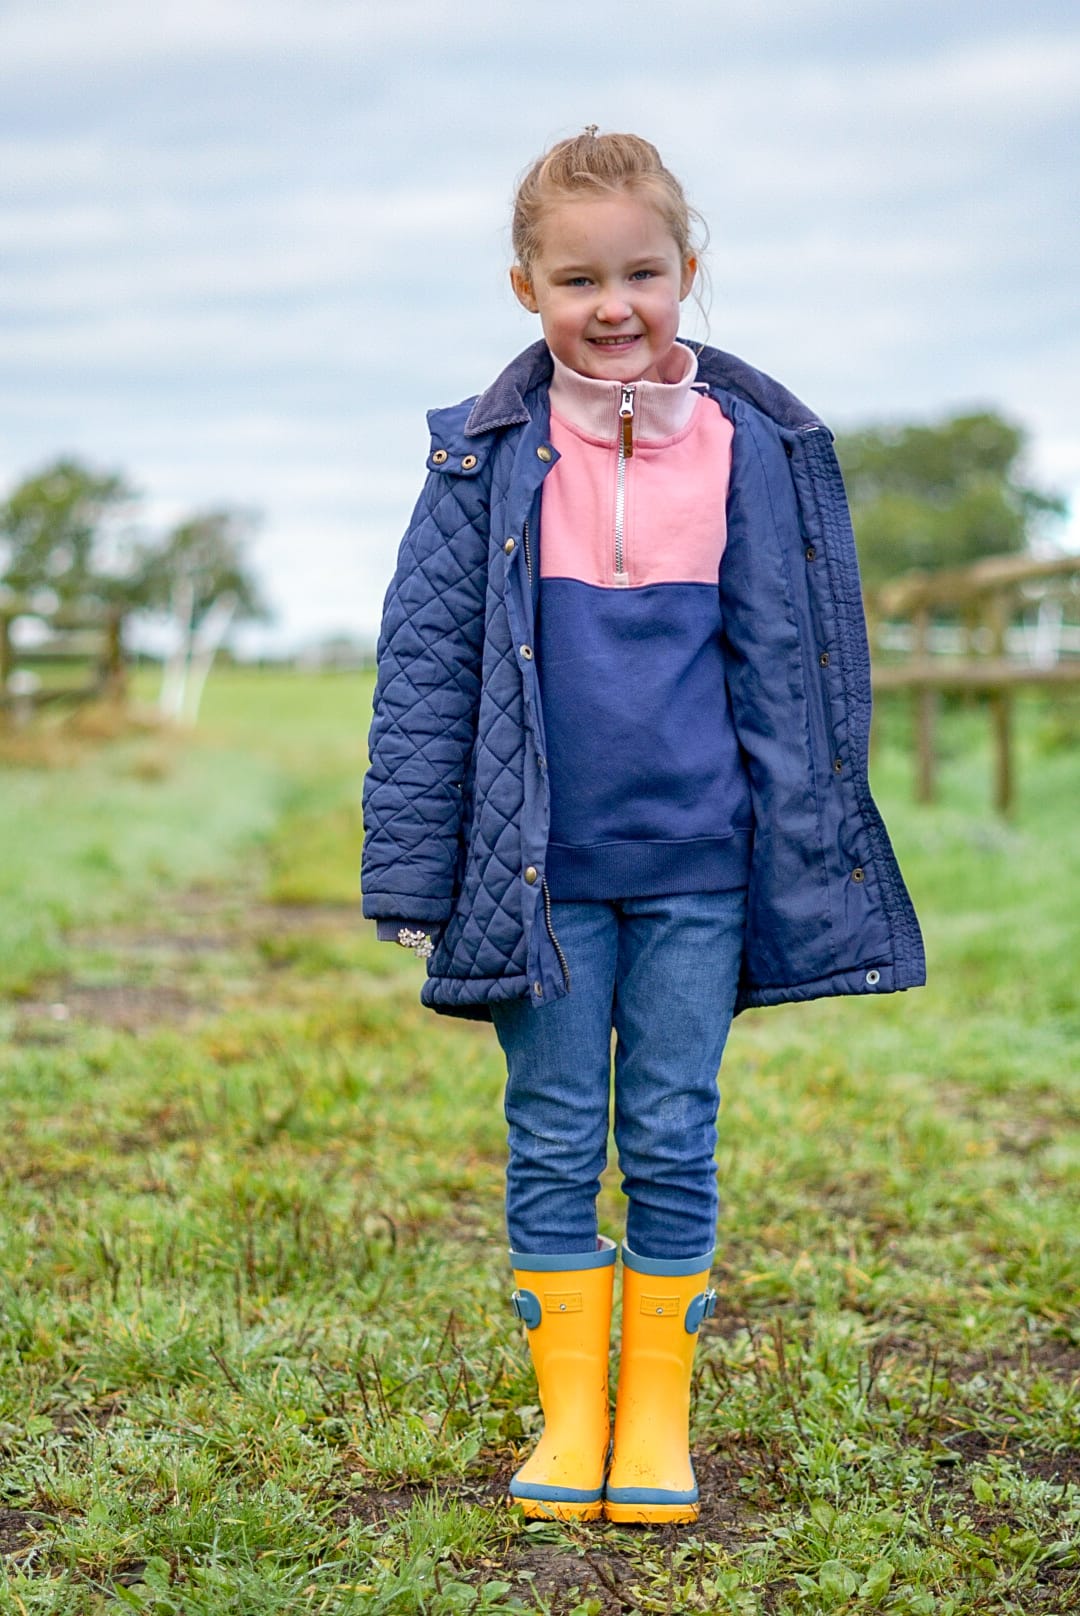 Outlet Yellow Todhpurs Wellies